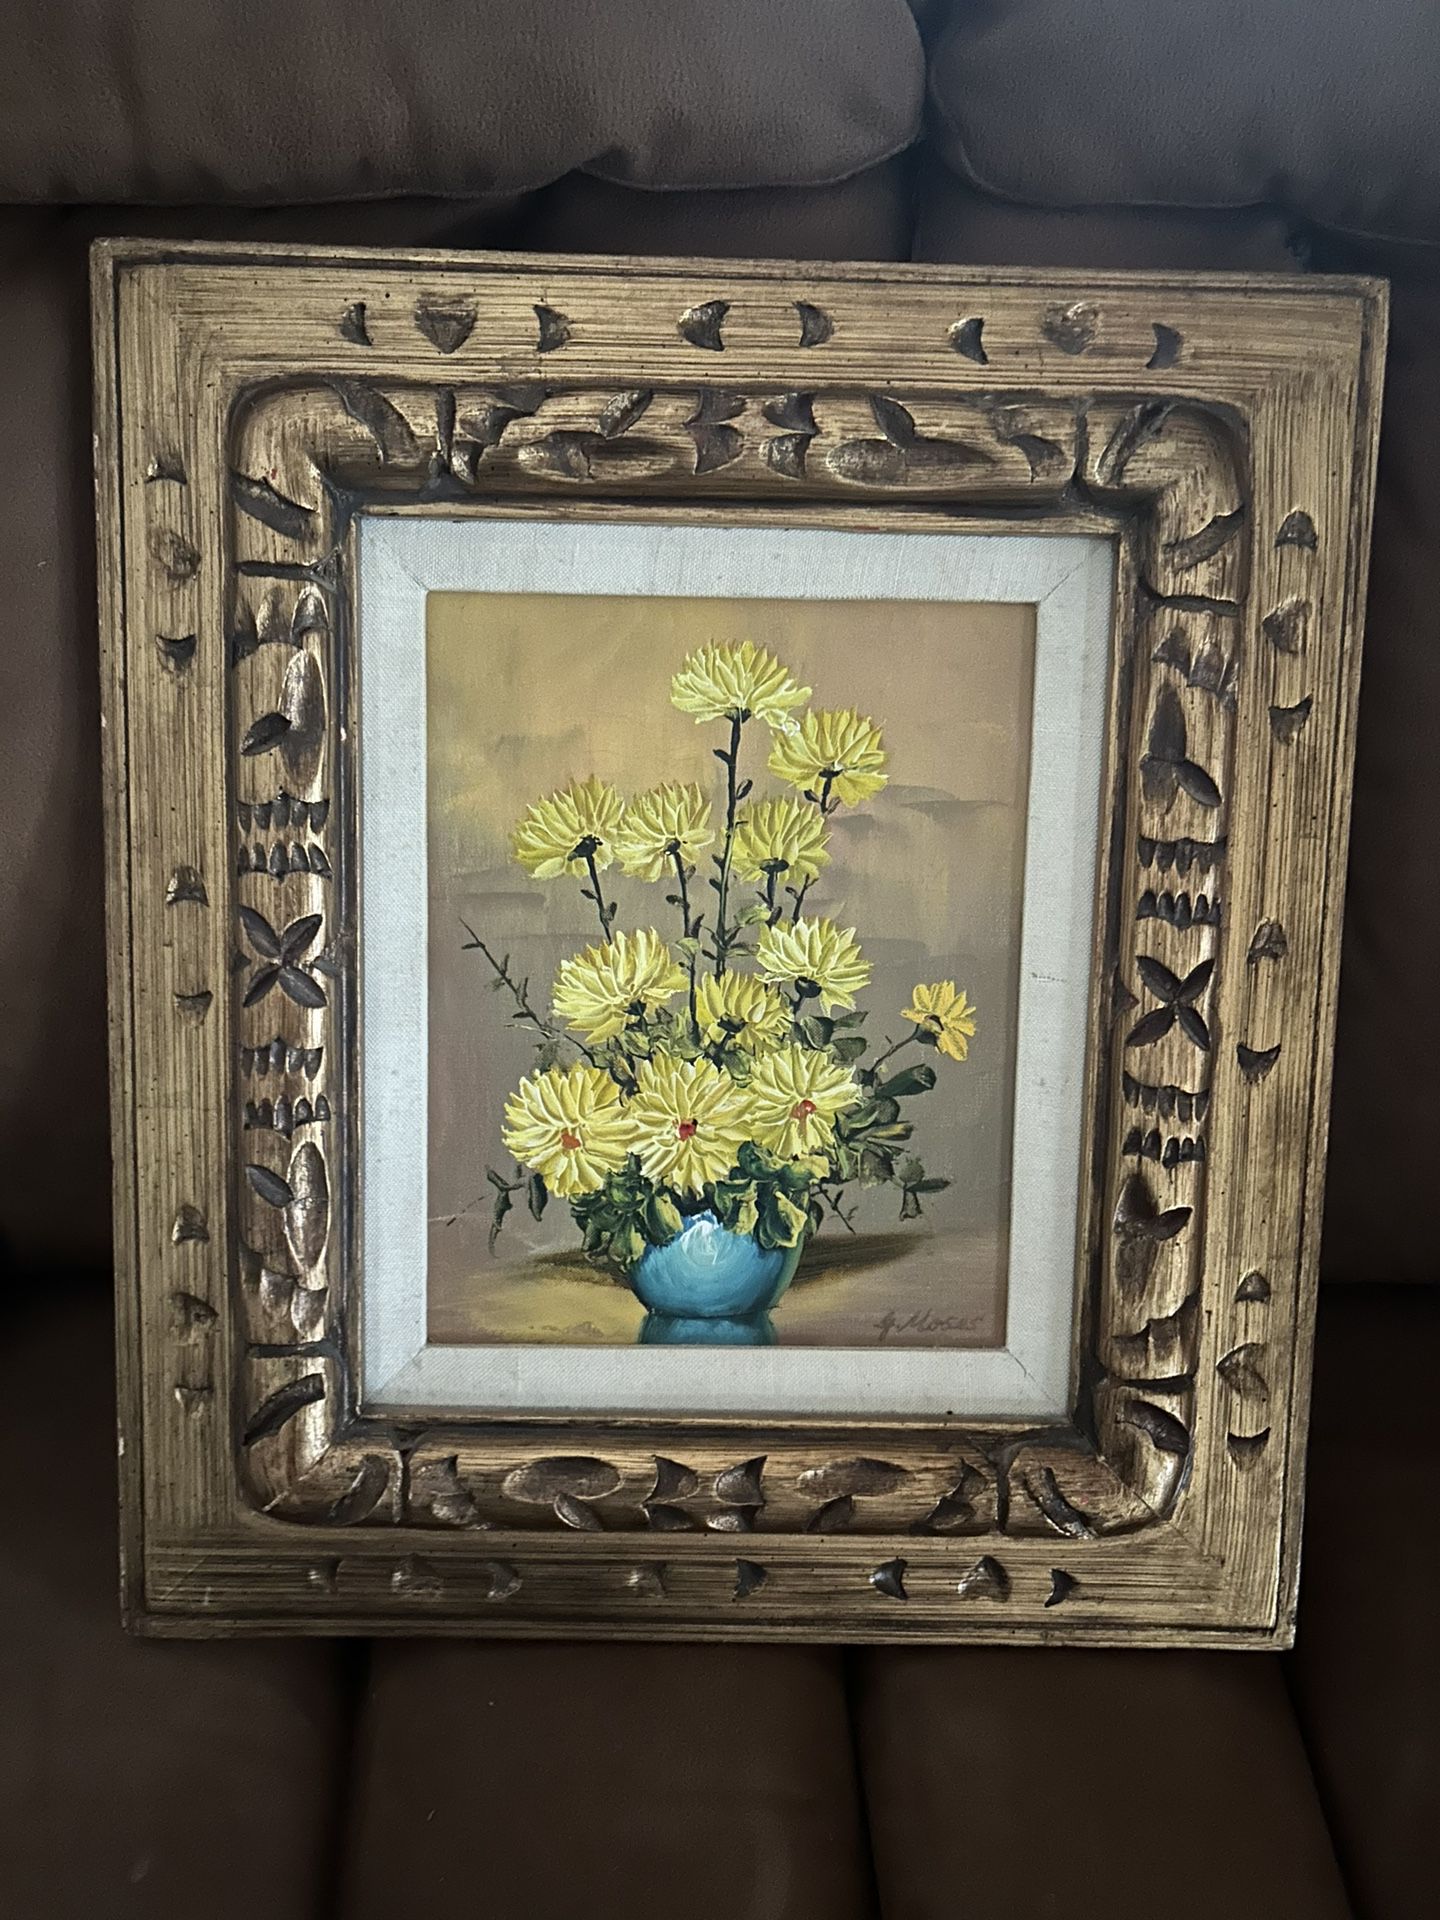 Beautifully Framed Yellow Floral Still Life 8 X 10 Original Oil Painting Vintage